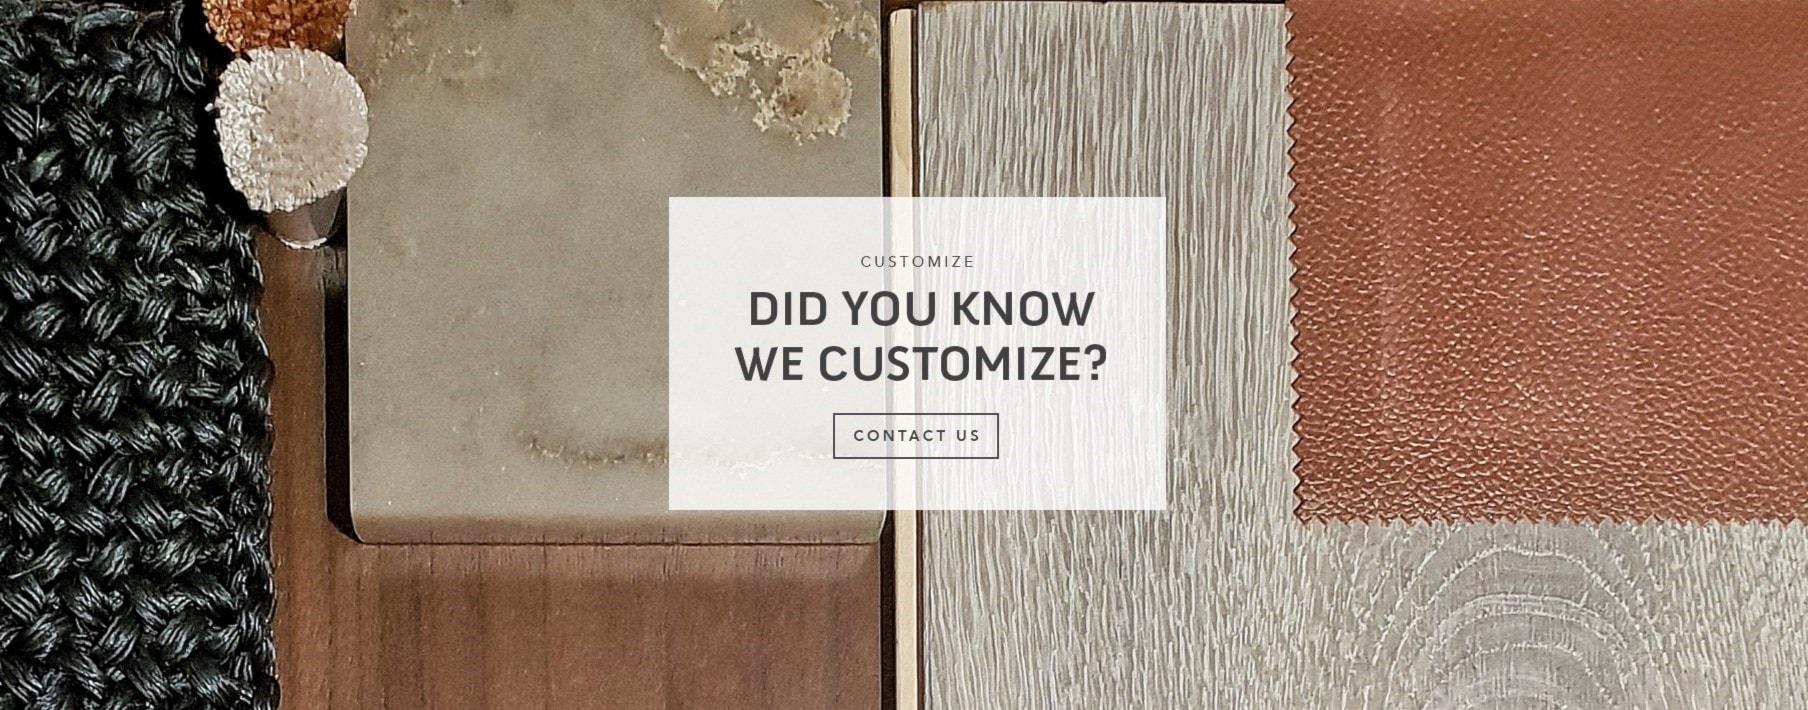 Did you know we customize? Contact us.